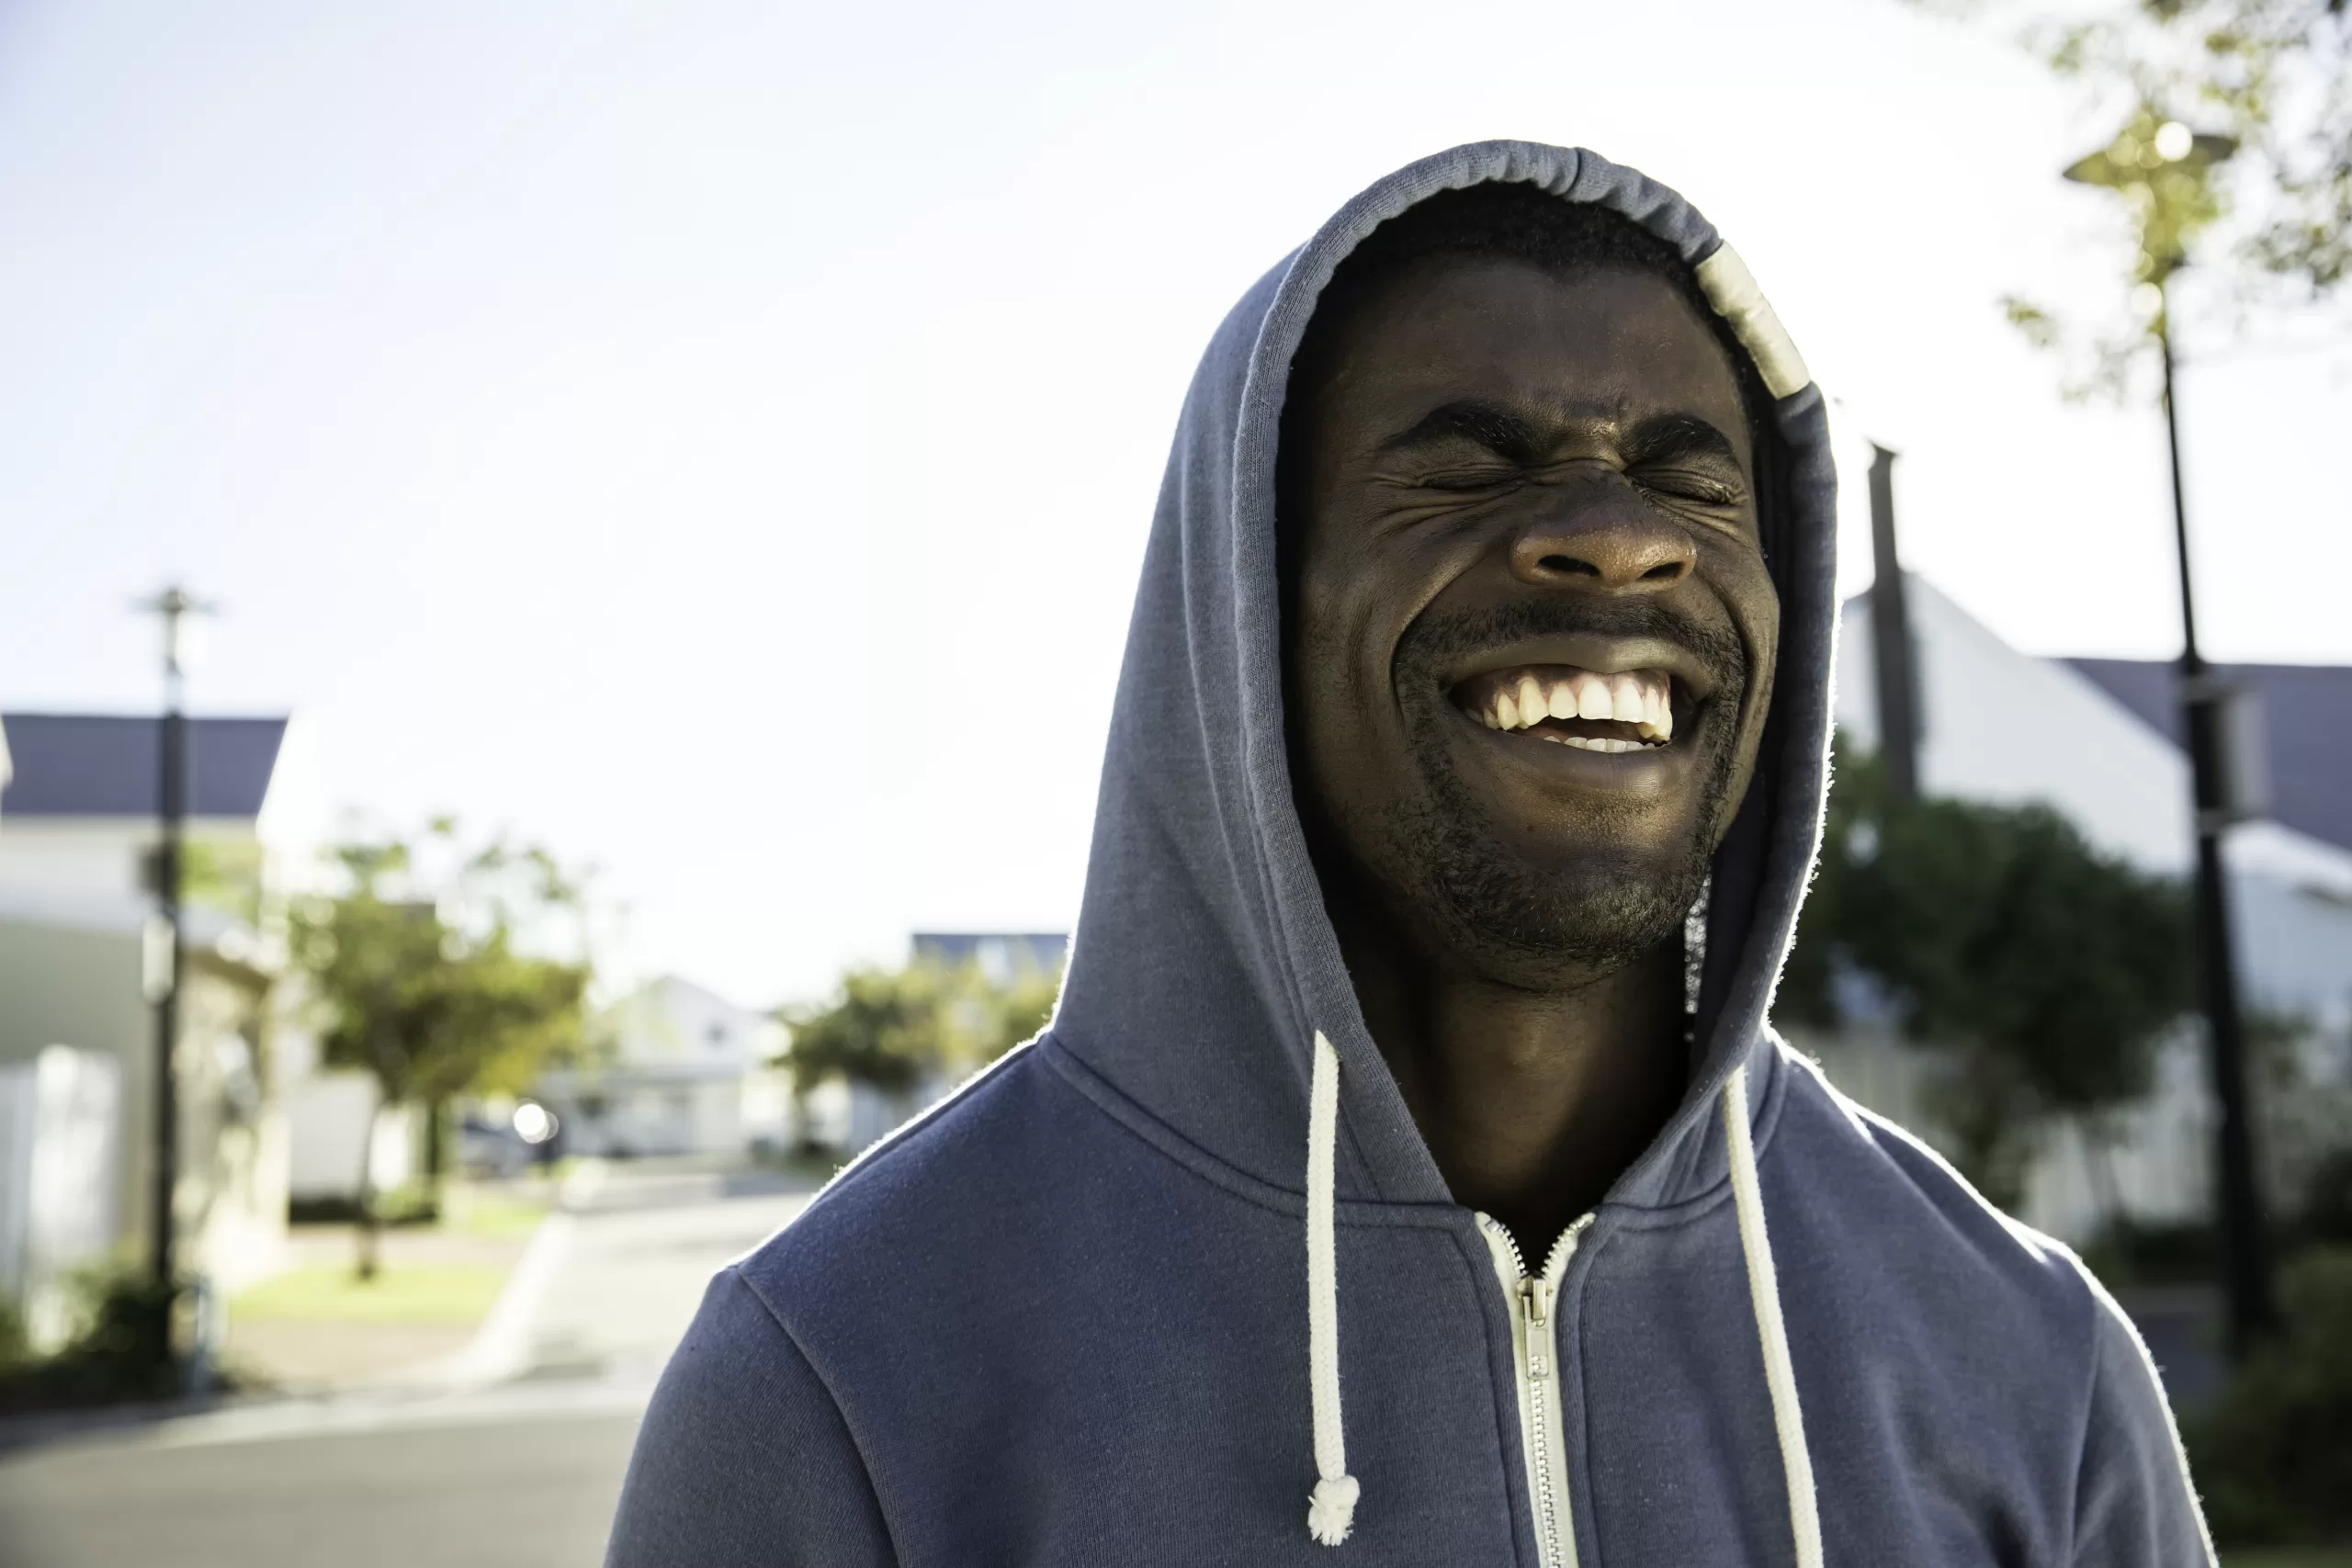 portrait of man wearing hooded top eyes closed laughing